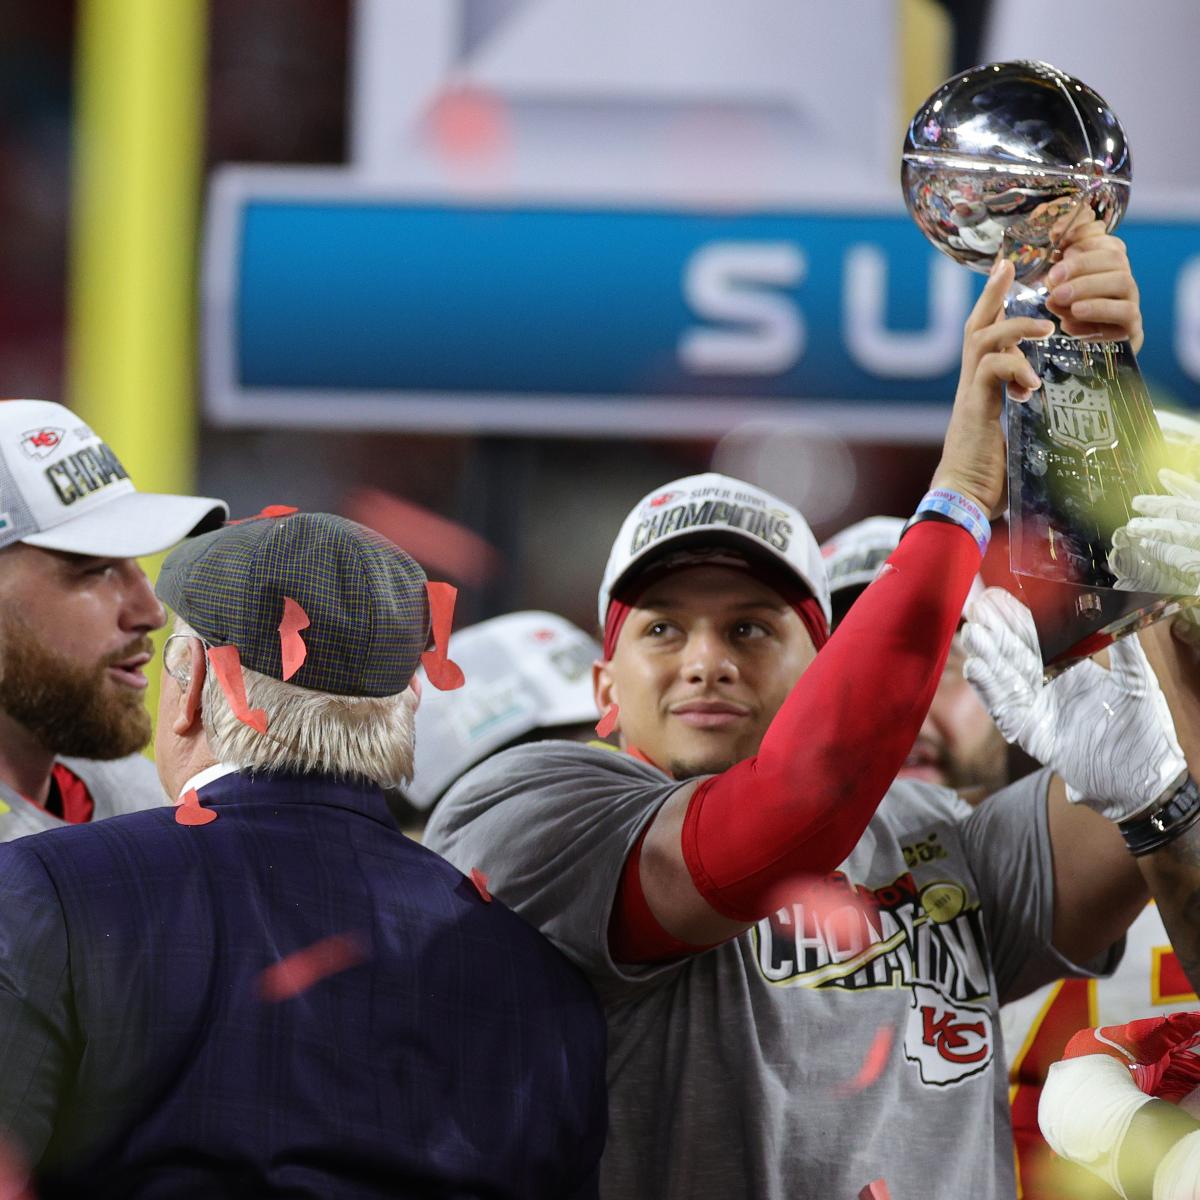 Chiefs Parade 2020: Live Stream, TV Schedule and Weather Forecast | Bleacher Report ...1200 x 1200